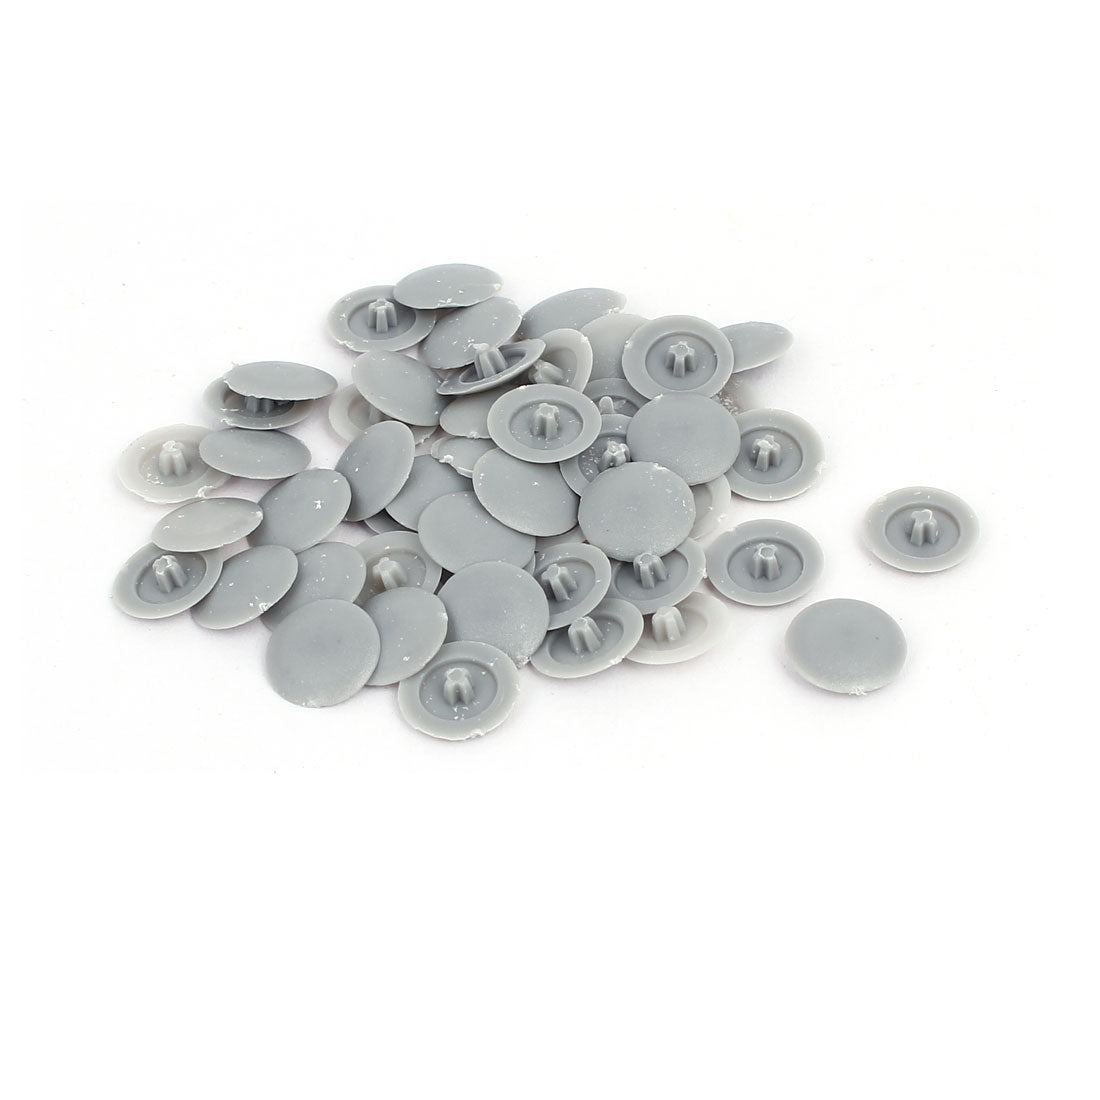 uxcell Uxcell 12mm Dia Plastic Phillips Screw Cap Hole Plugs Dust Proof Covers Gray 50pcs